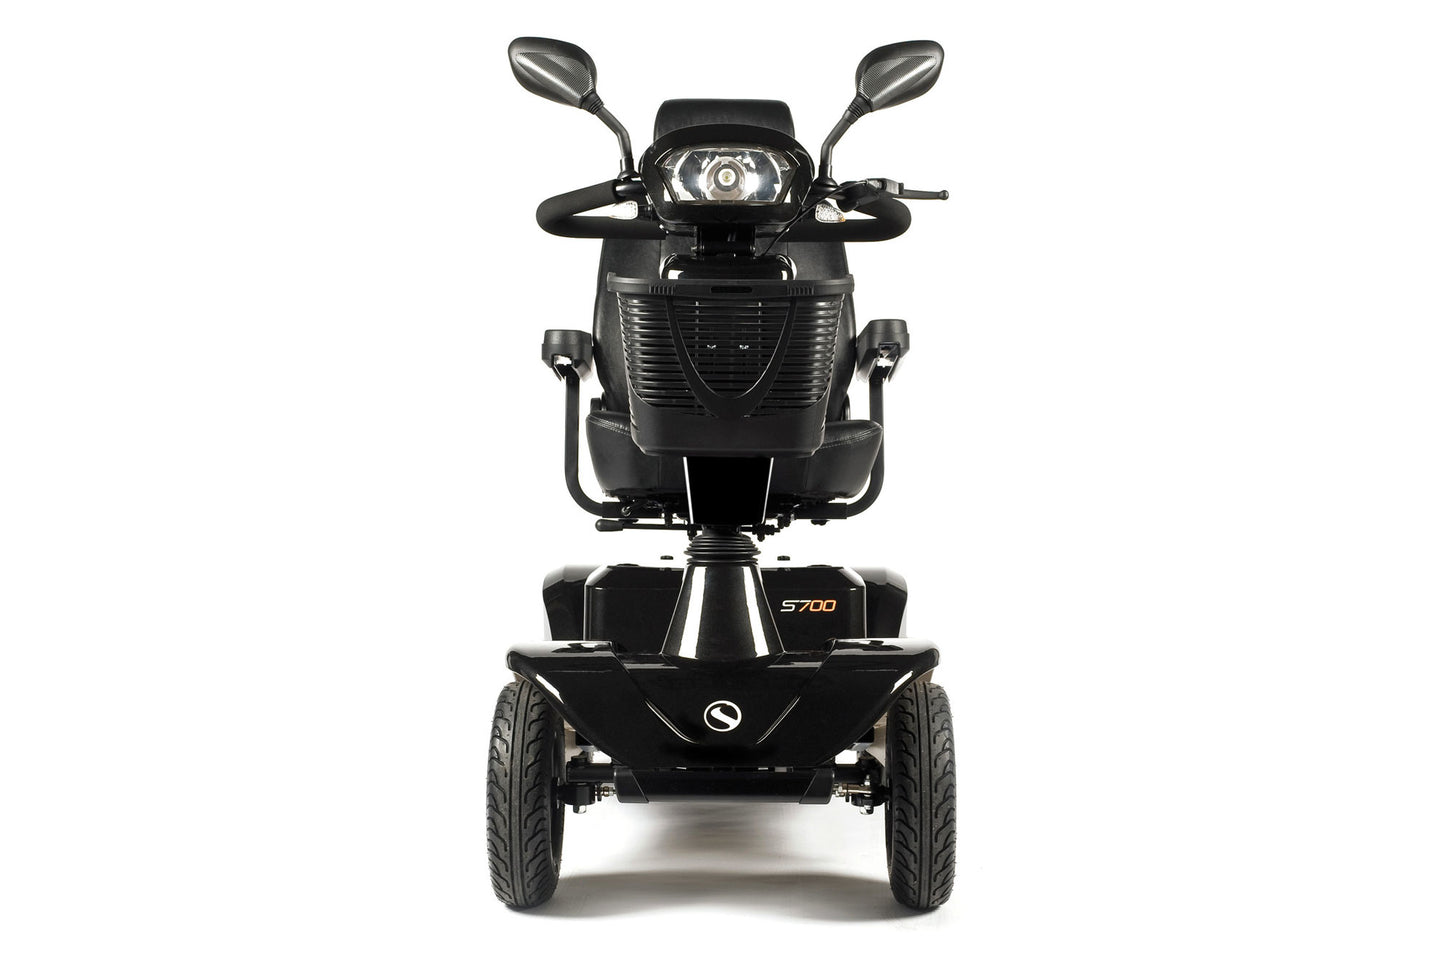 Sterling S700 - 8 mph Mobility Scooter Black